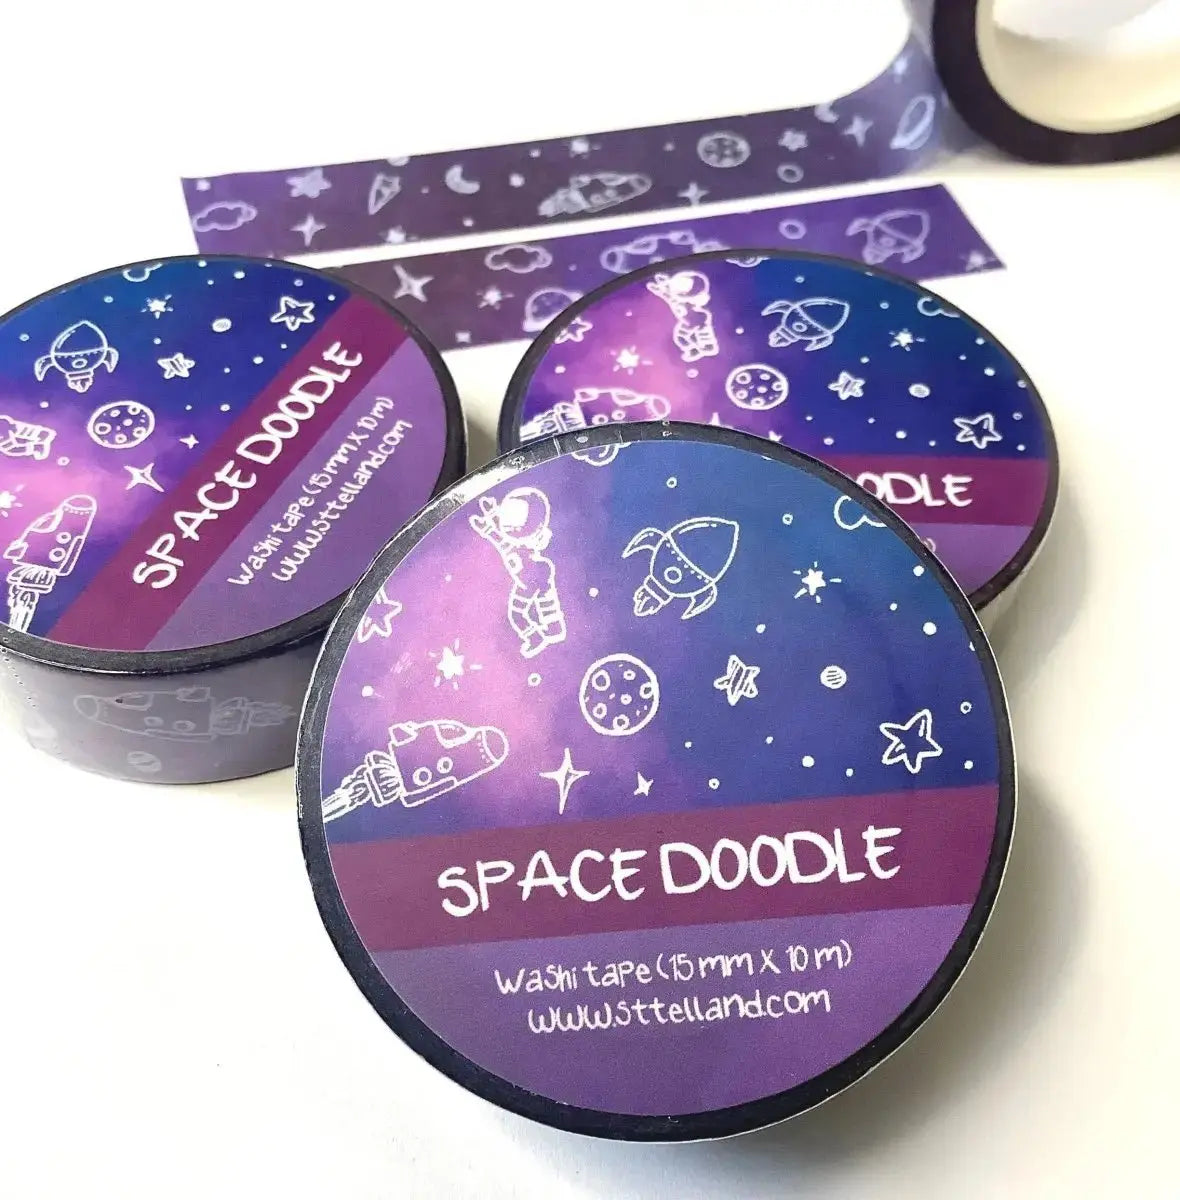 Space Doodles Washi Tape - custom washi tape - Washi Tape - Constellation Tape - Eco Friendly Tape - Art, Deco Gift for Flower Lovers Sttelland Boutique